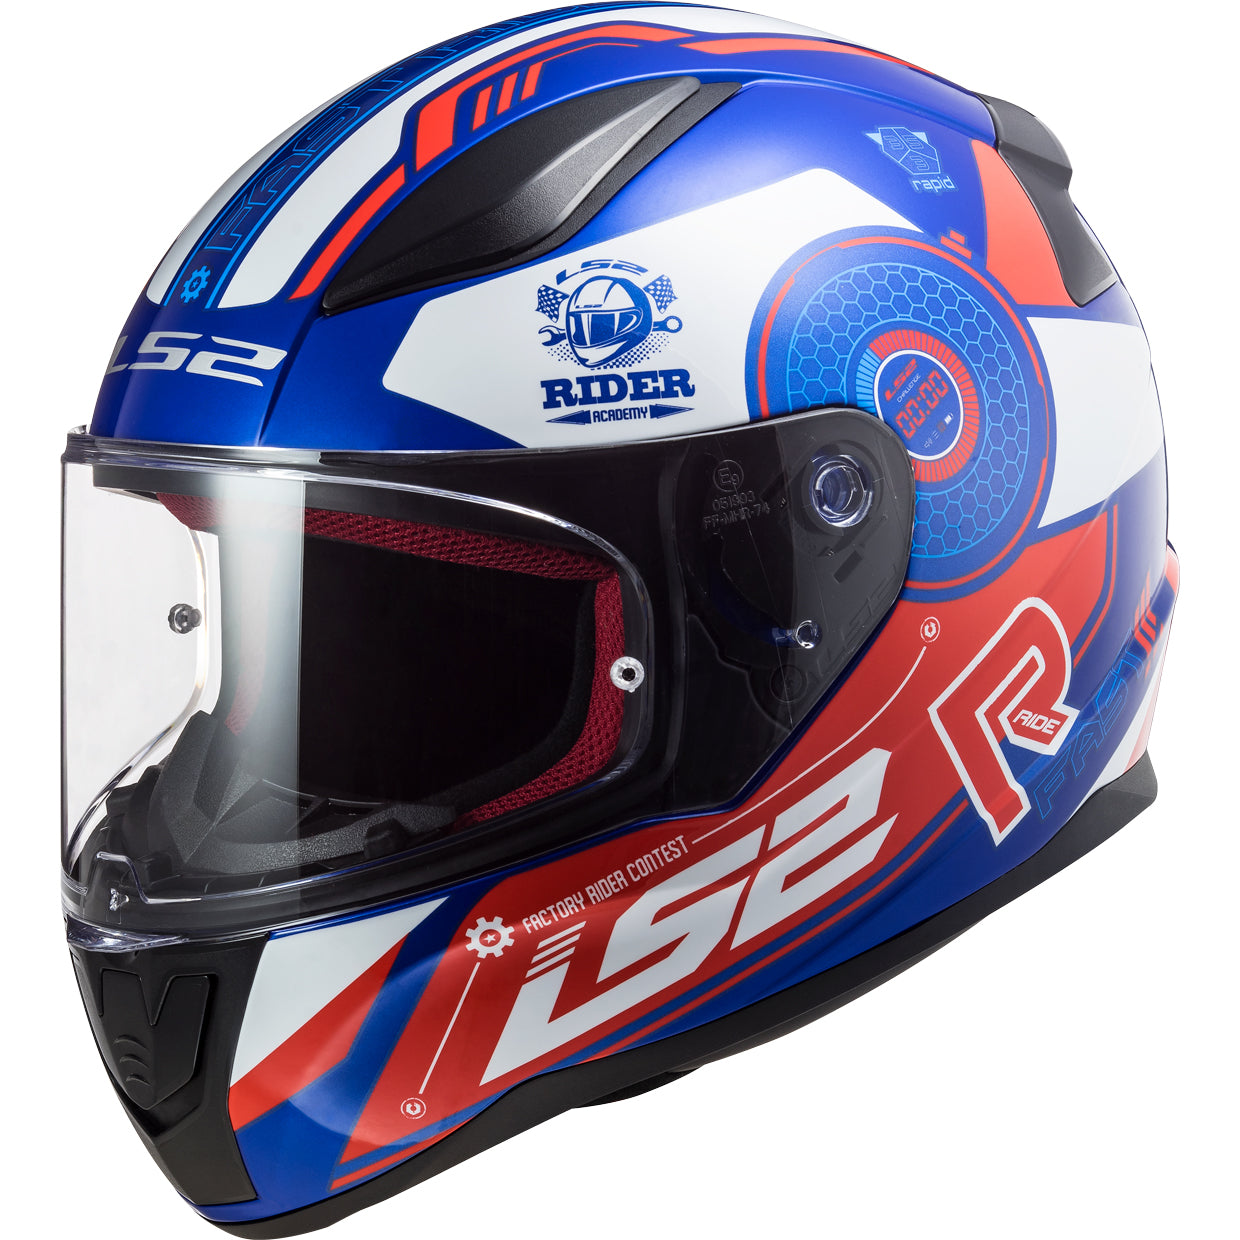 casco ls2, casco ls2 Suppliers and Manufacturers at